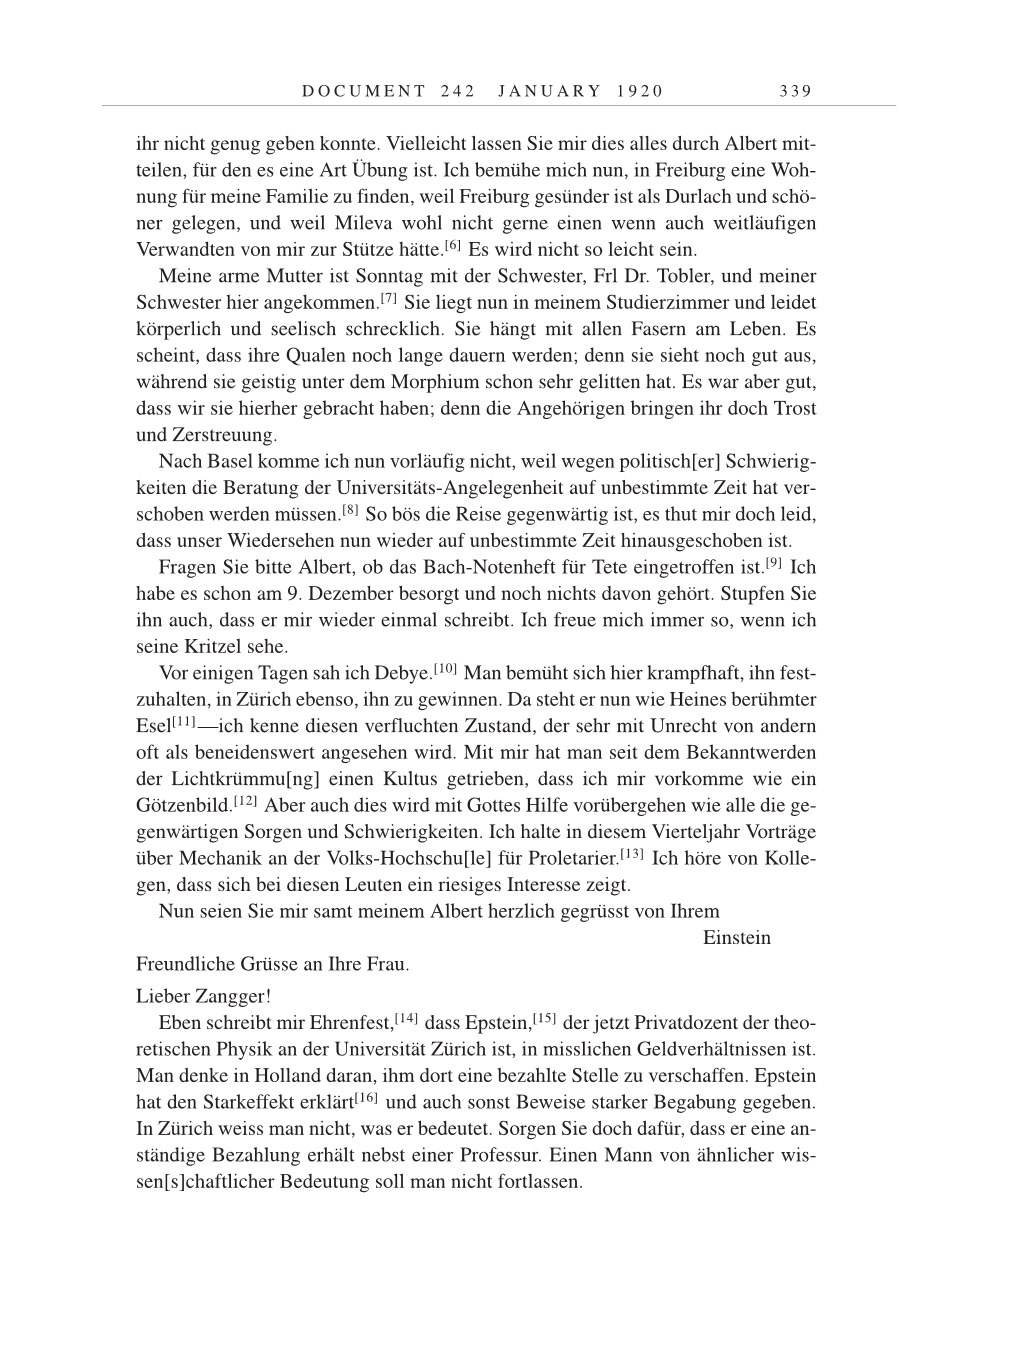 Volume 9: The Berlin Years: Correspondence January 1919-April 1920 page 339